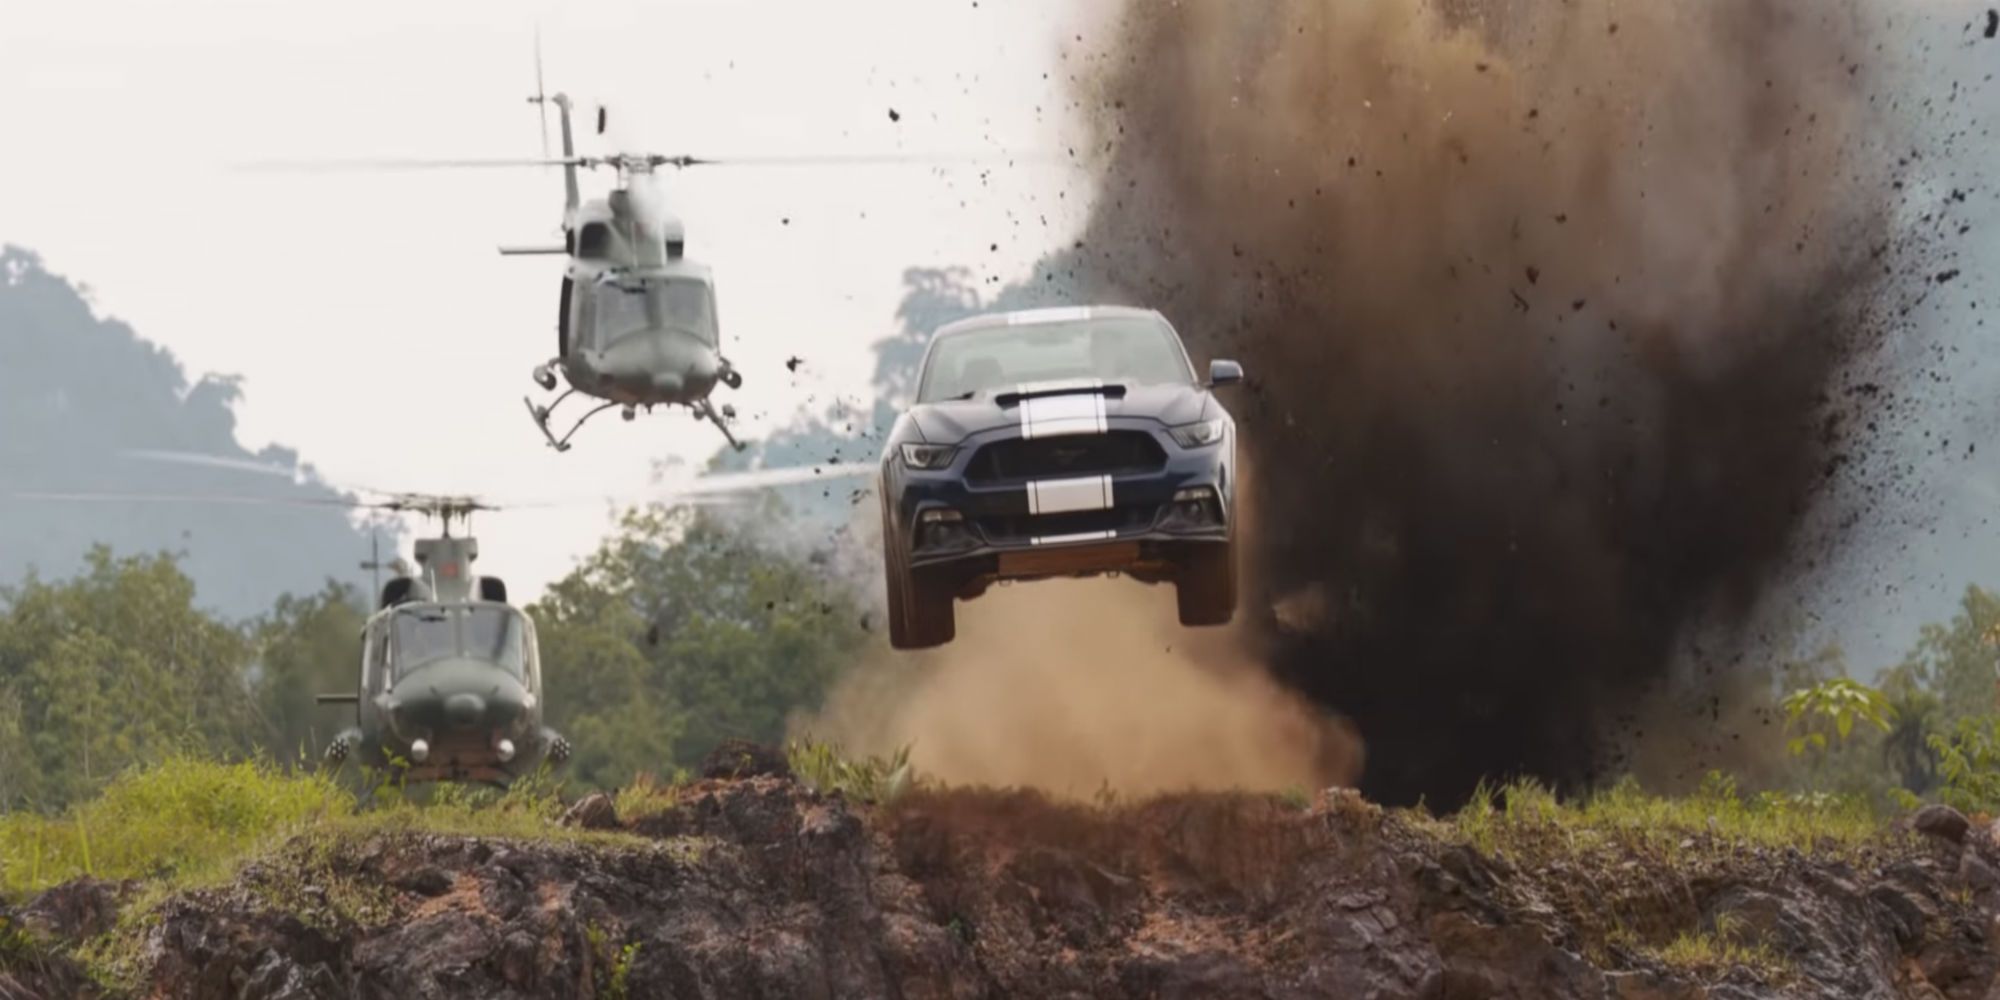 Two helicopters chase a car through a minefield in Fast and Furious 9